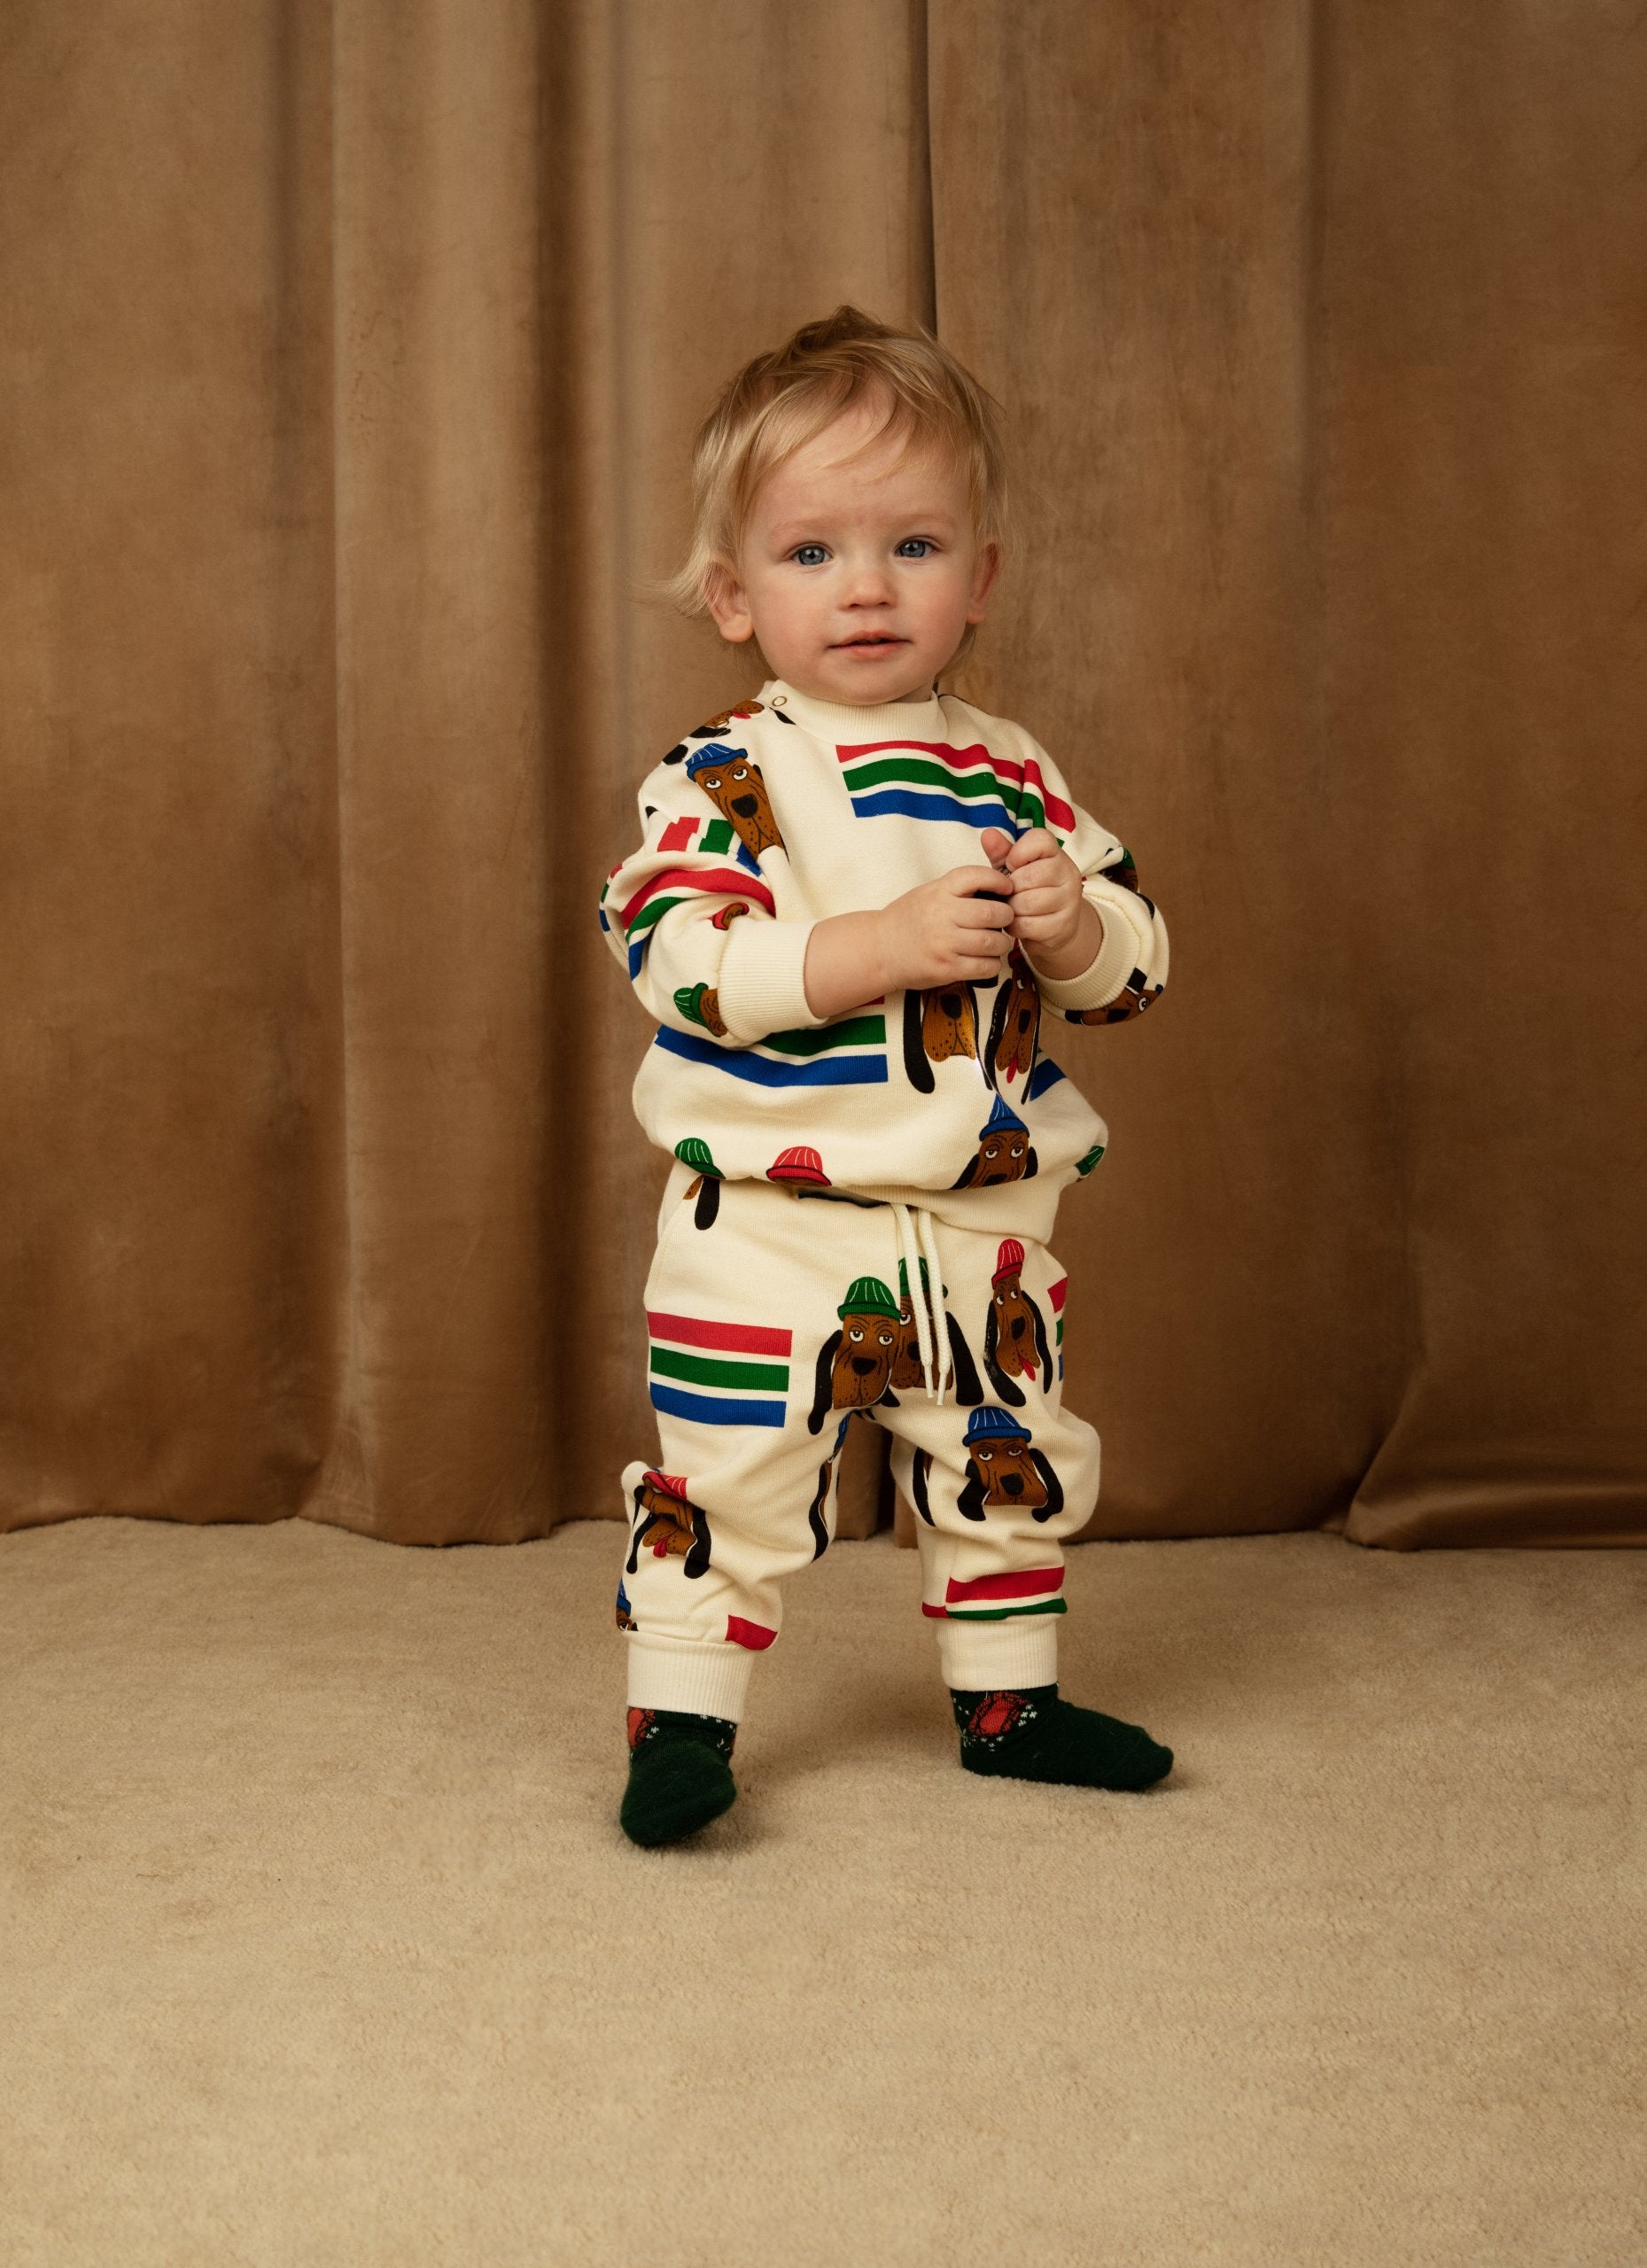 MINI RODINI - Bloodhound - young child wearing tracksuit with bloodhound dog illustrations with red blue and green stripes